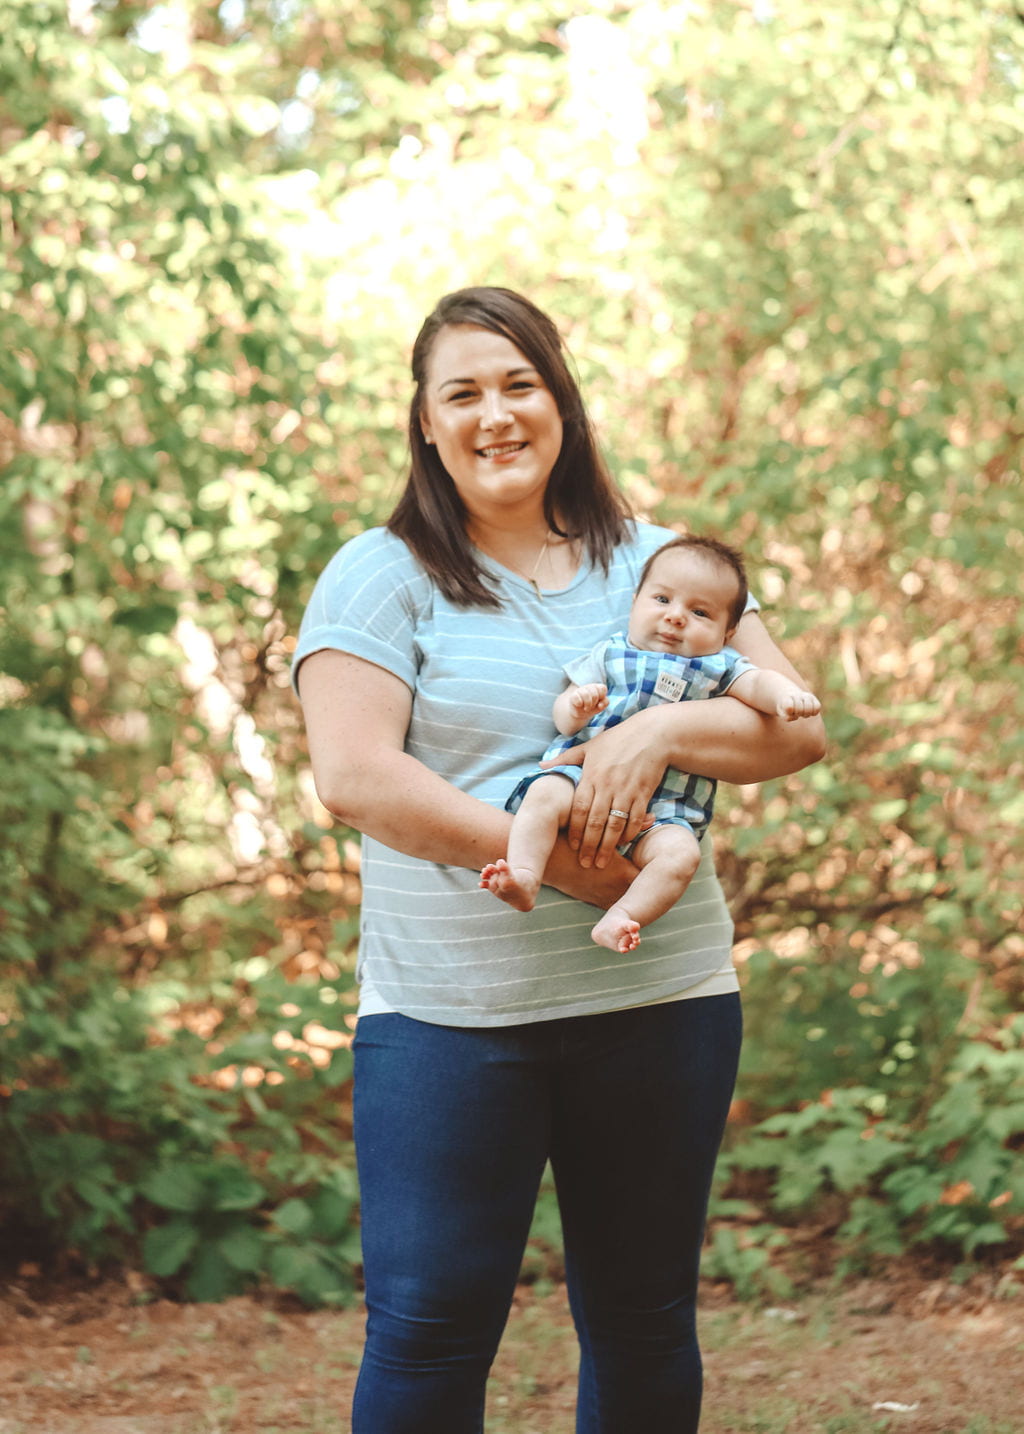 Molly-Ann is an Infant Mom, Again! Read on To Learn How The Faculty Support Her!